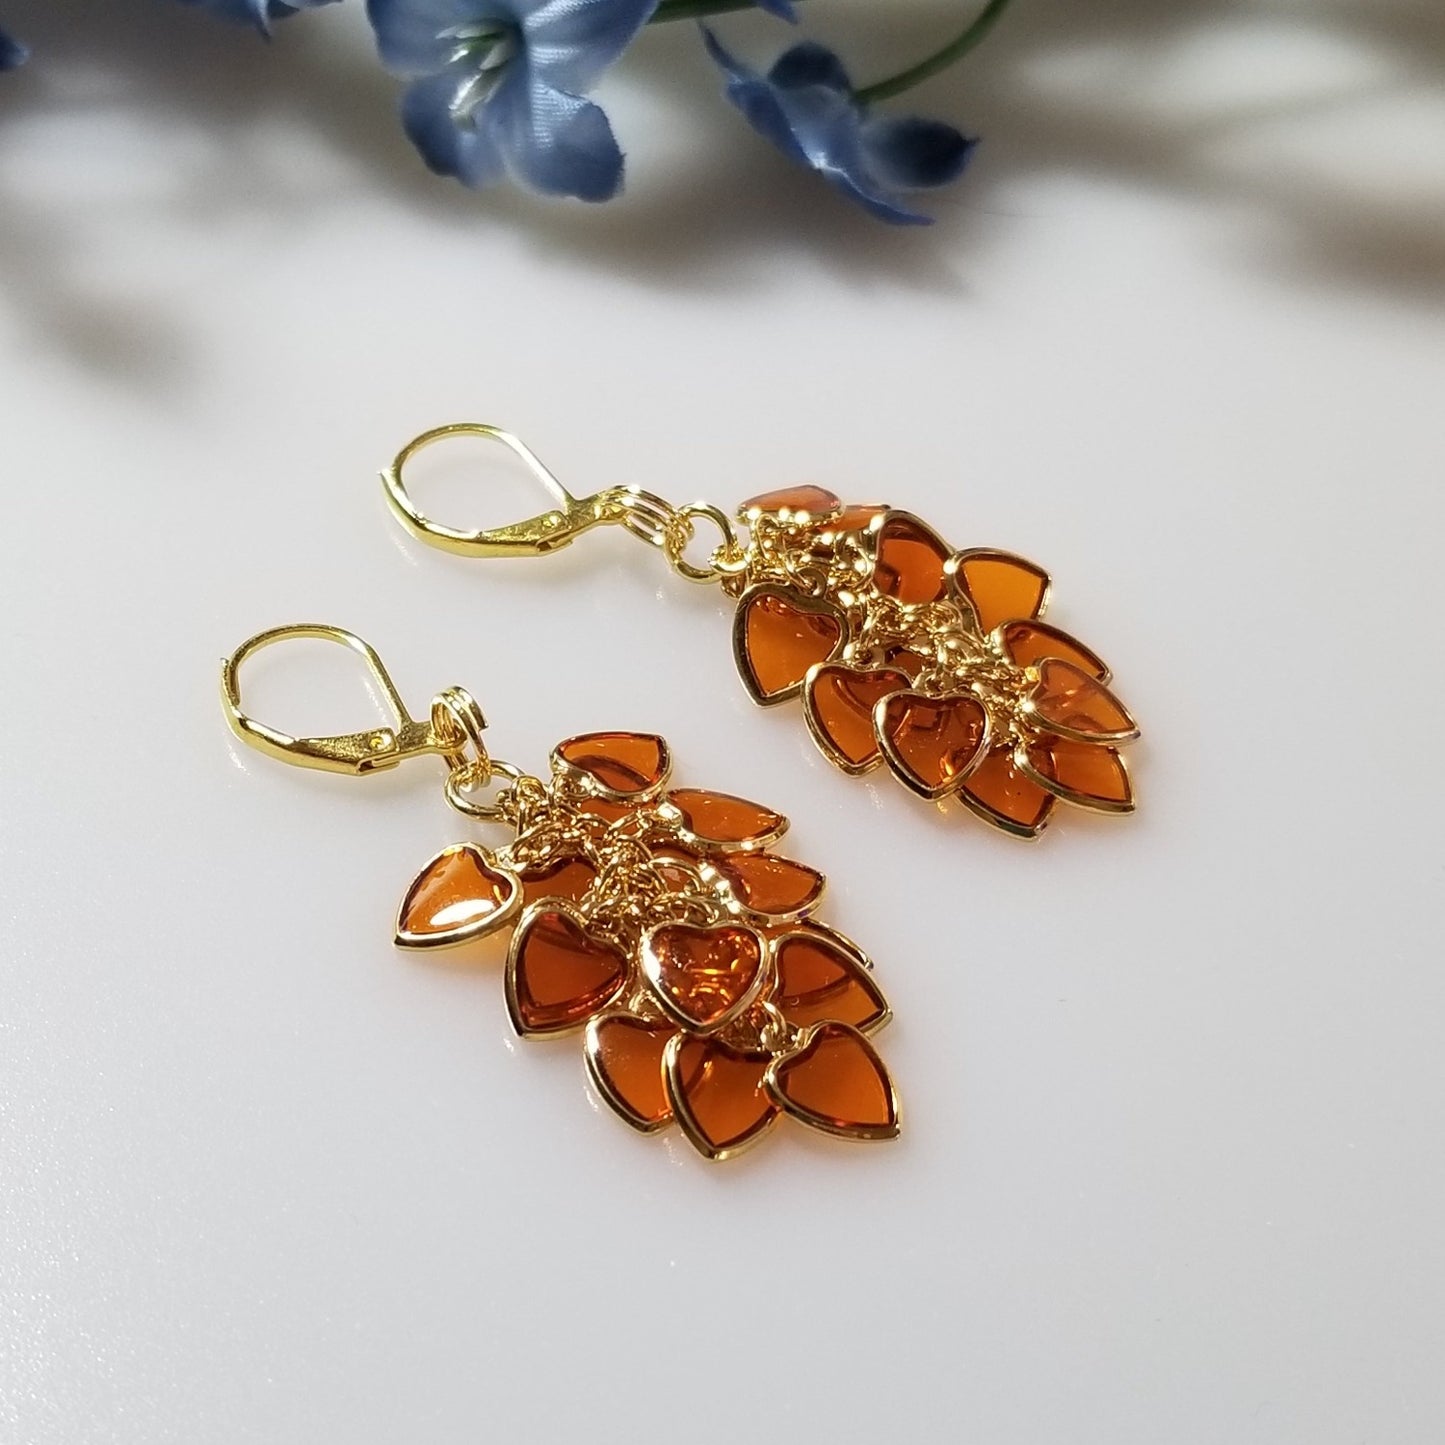 Autumn Earrings in Gold, Amber Hearts